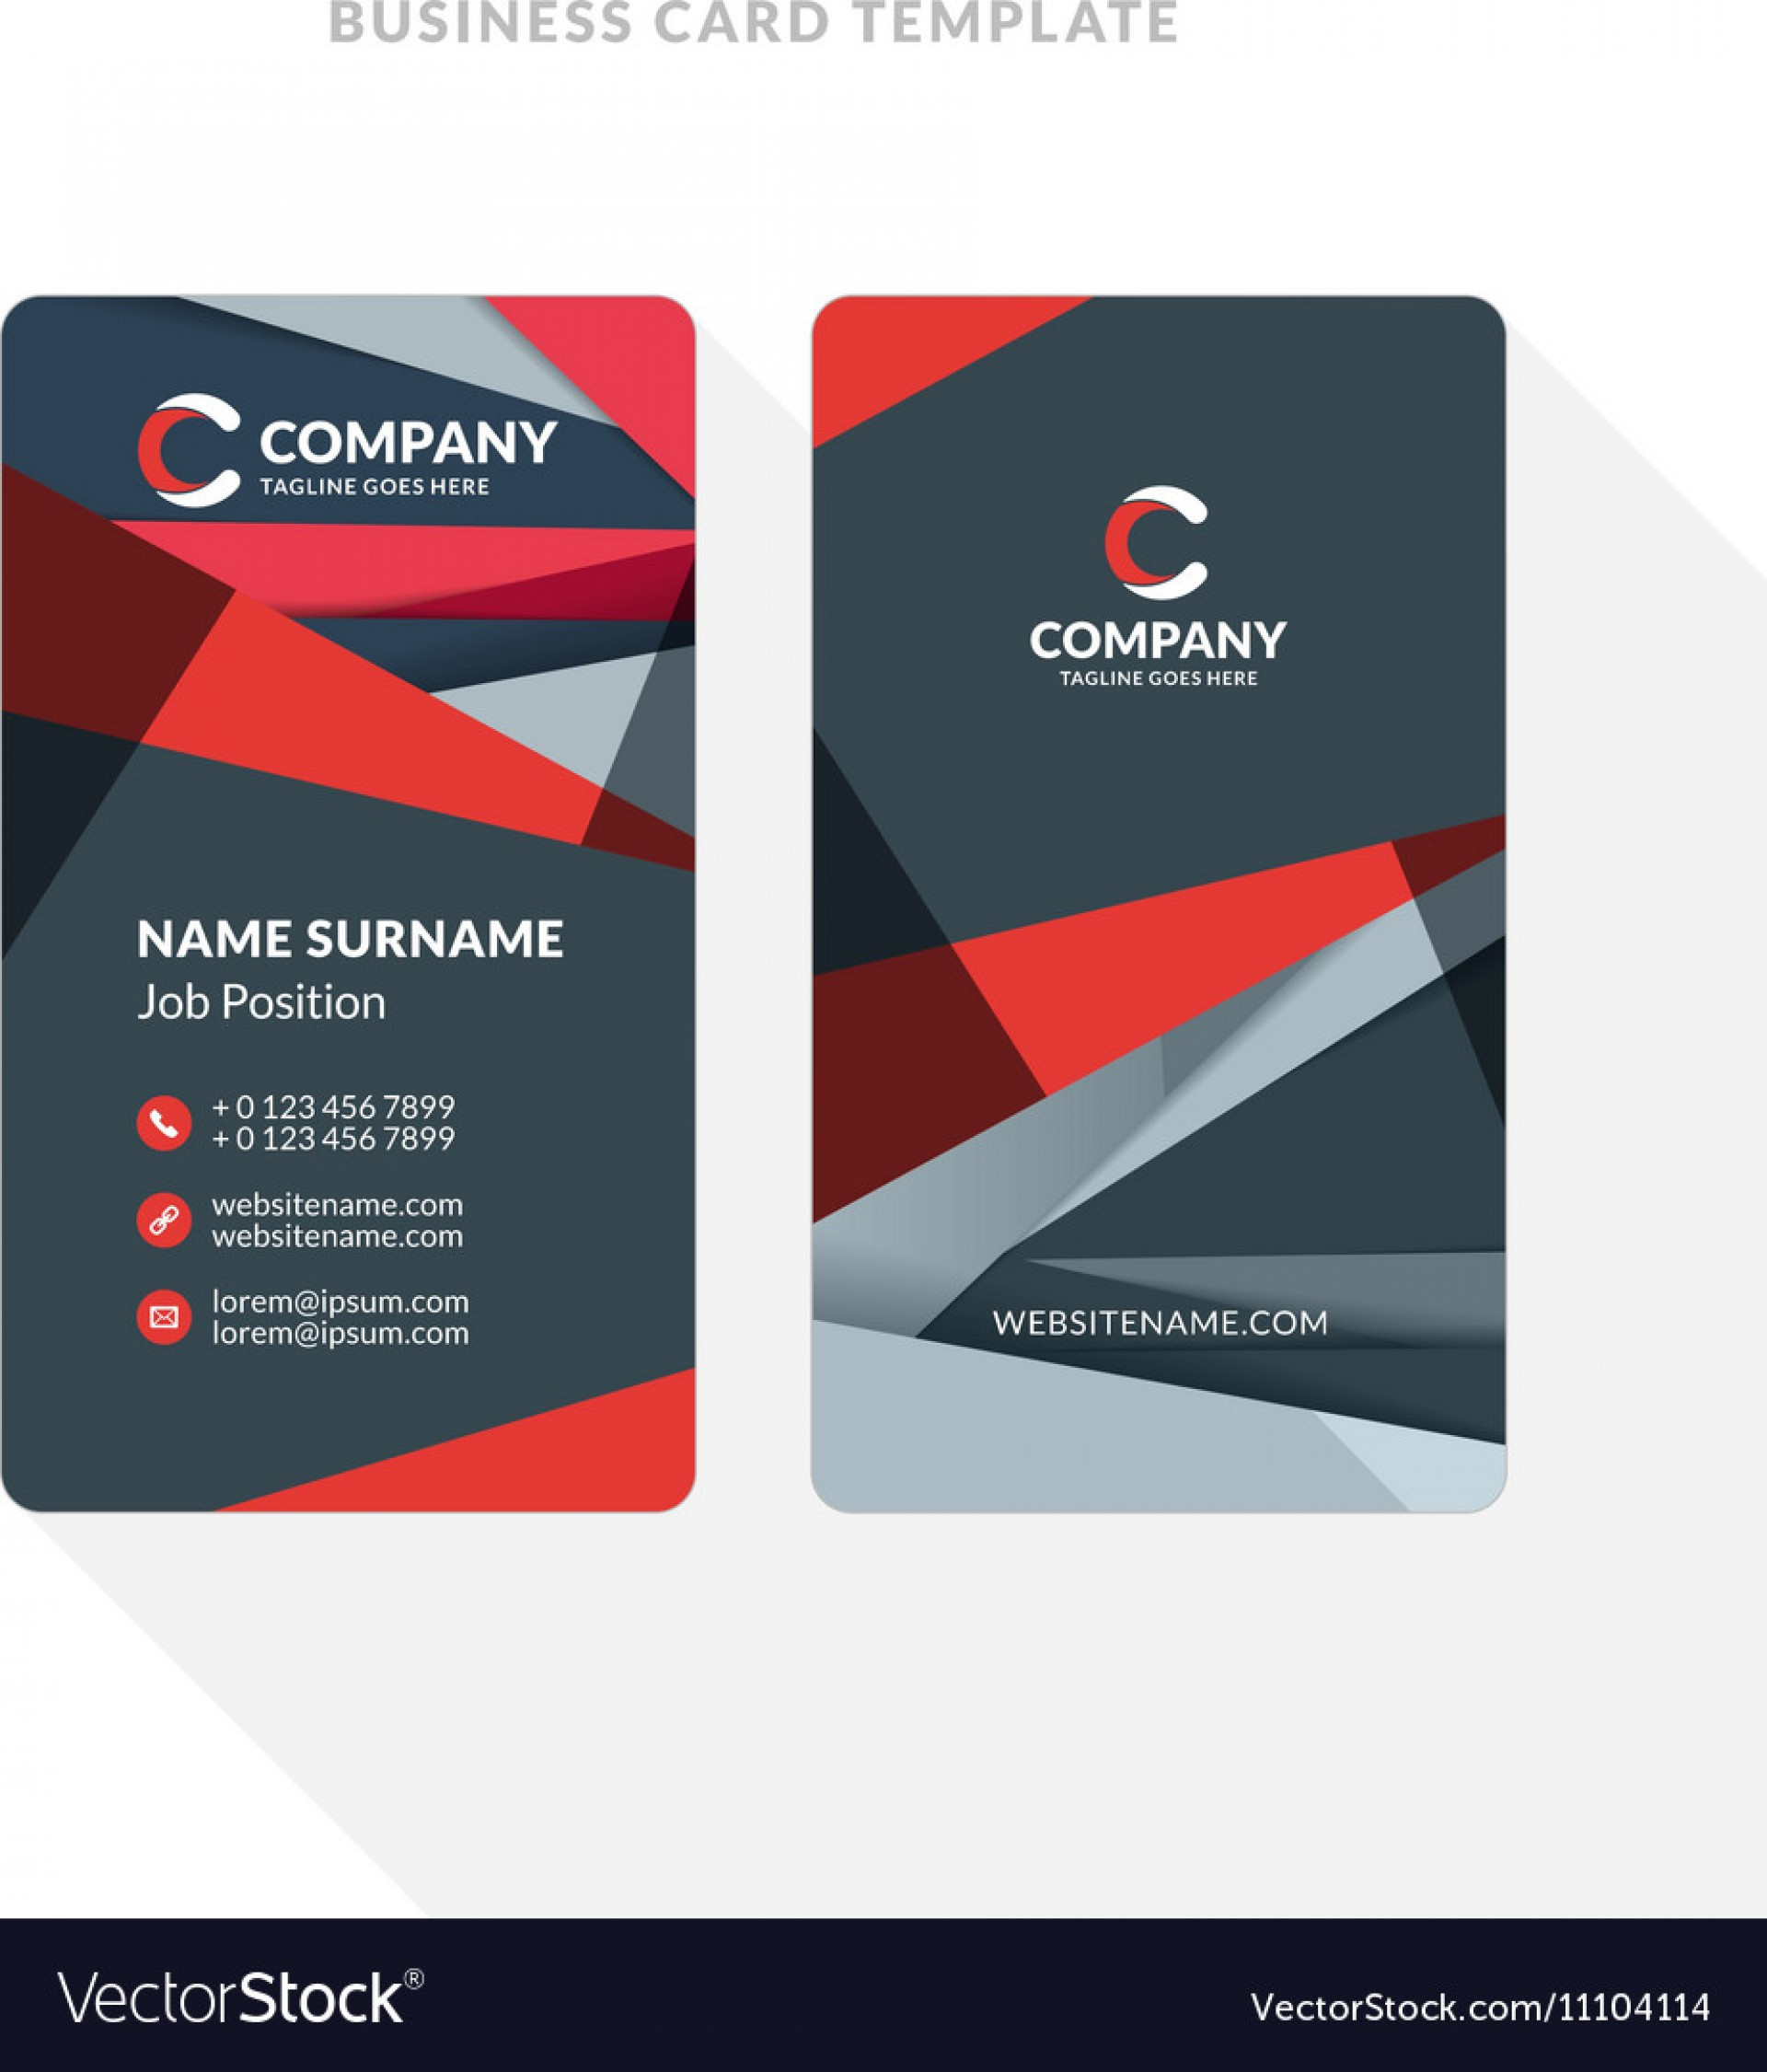 001 Double Sided Business Card Template Vertical with Vector Of Double Sided Business Card Template